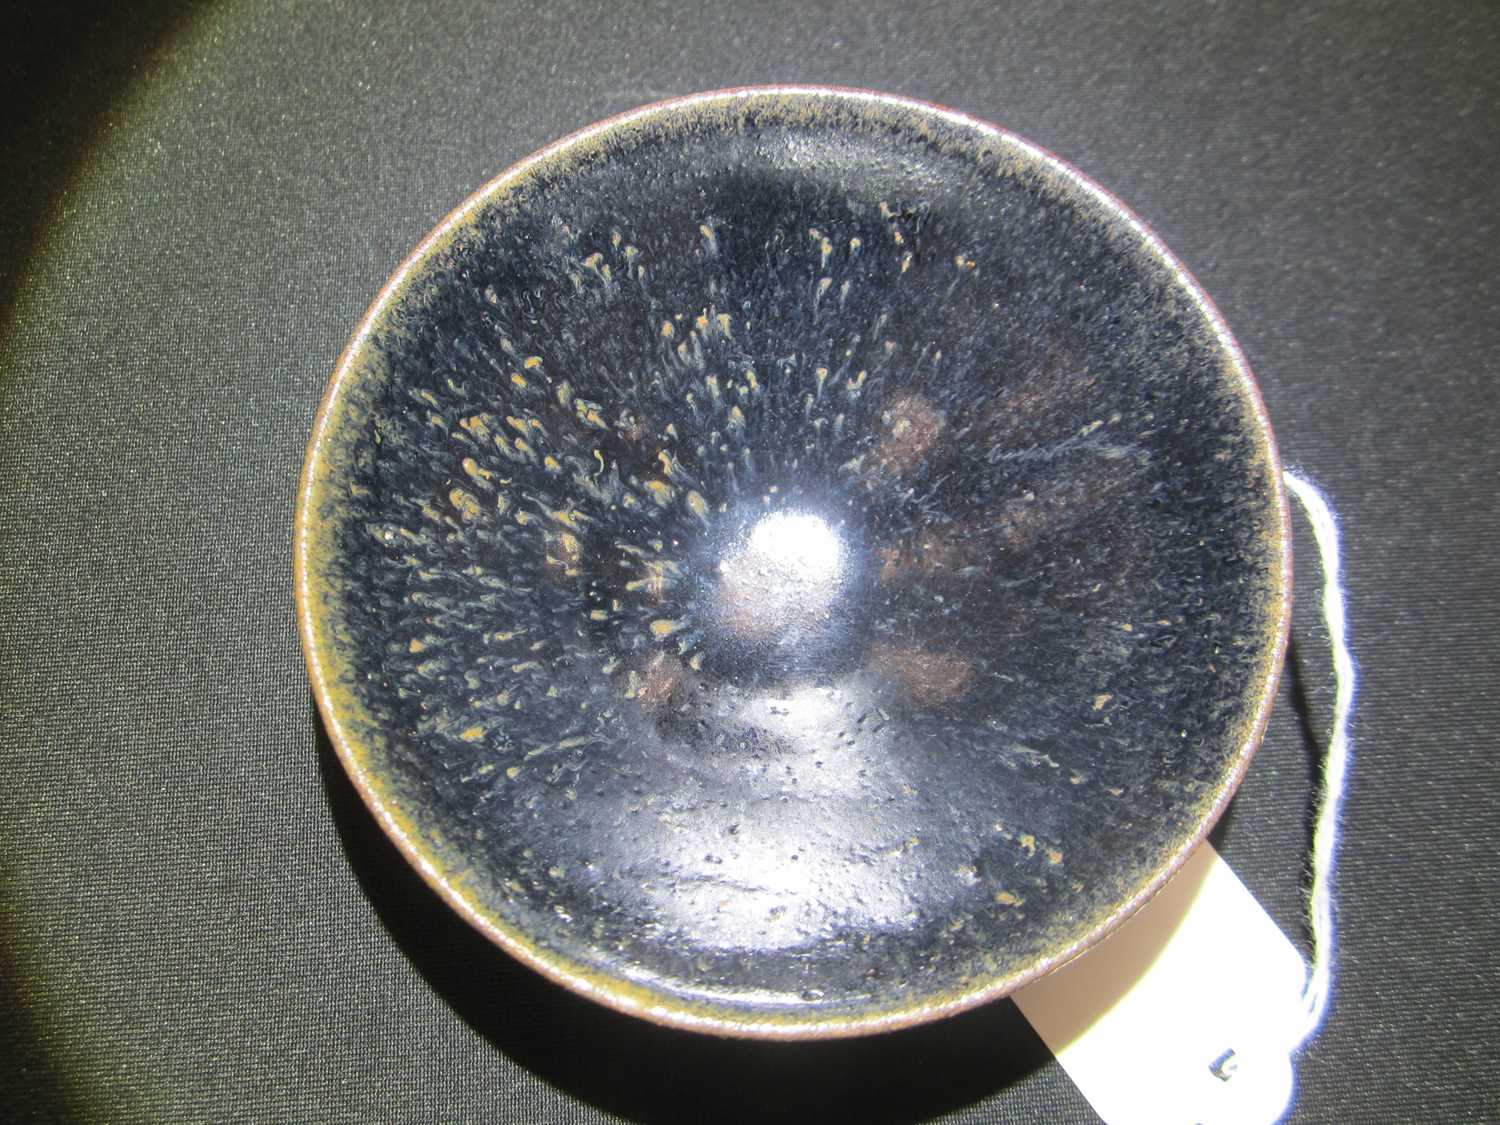 Two Chinese Jian ware bowls, Song Dynasty - Image 5 of 8